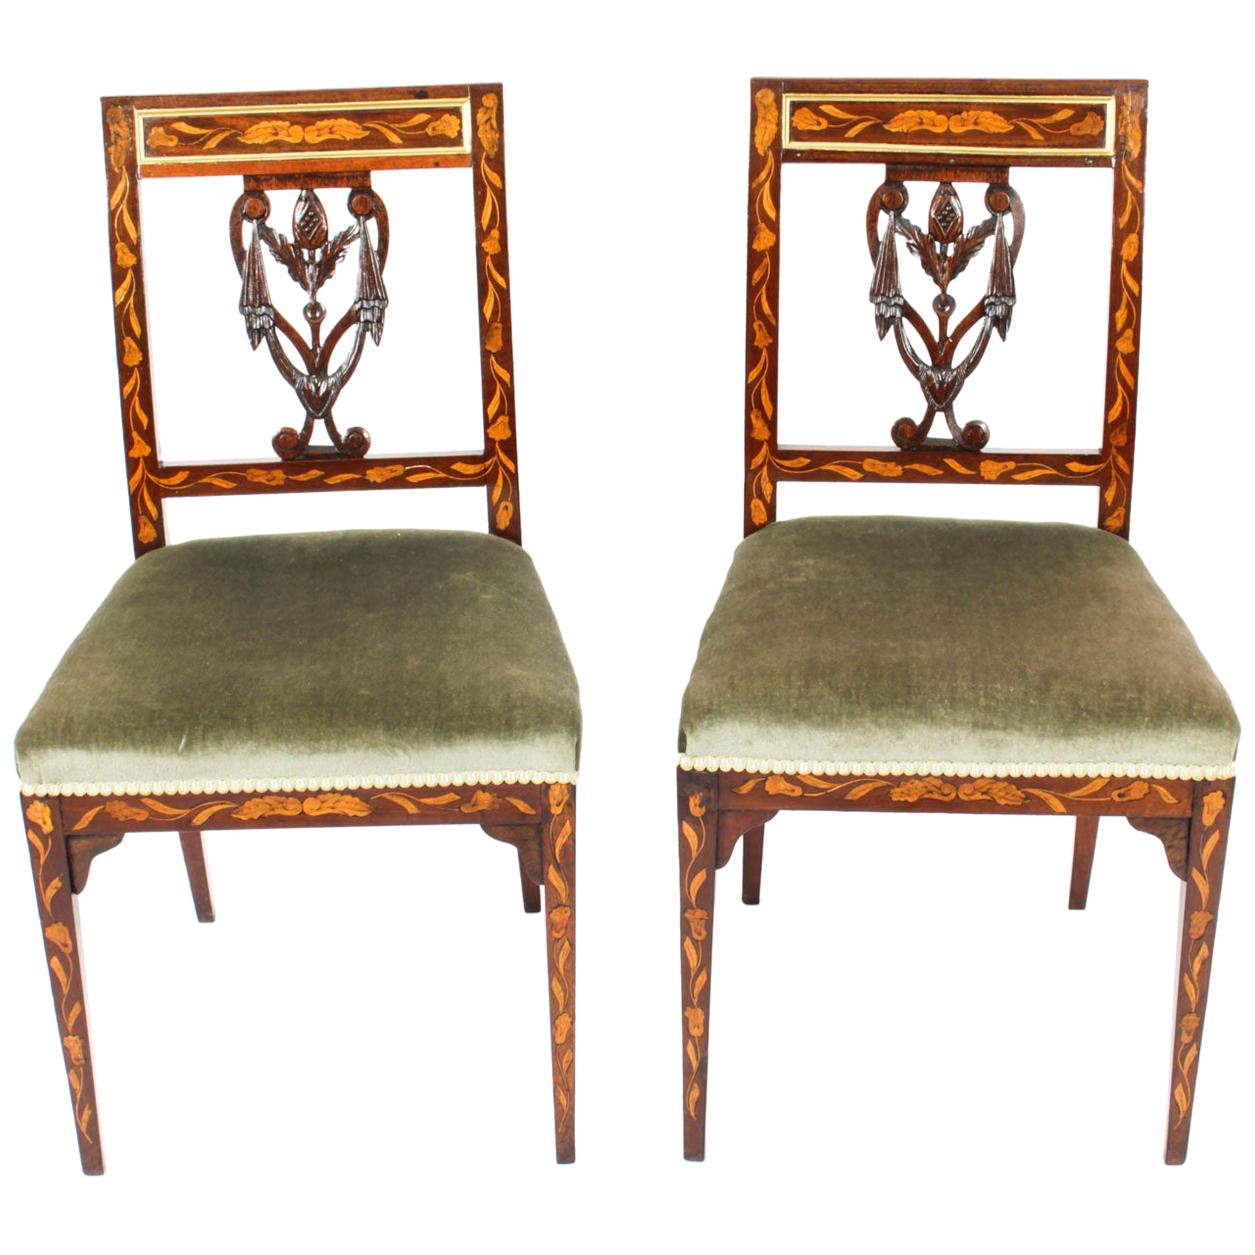 Antique Pair of Dutch Marquetry Side Chairs, 19th Century